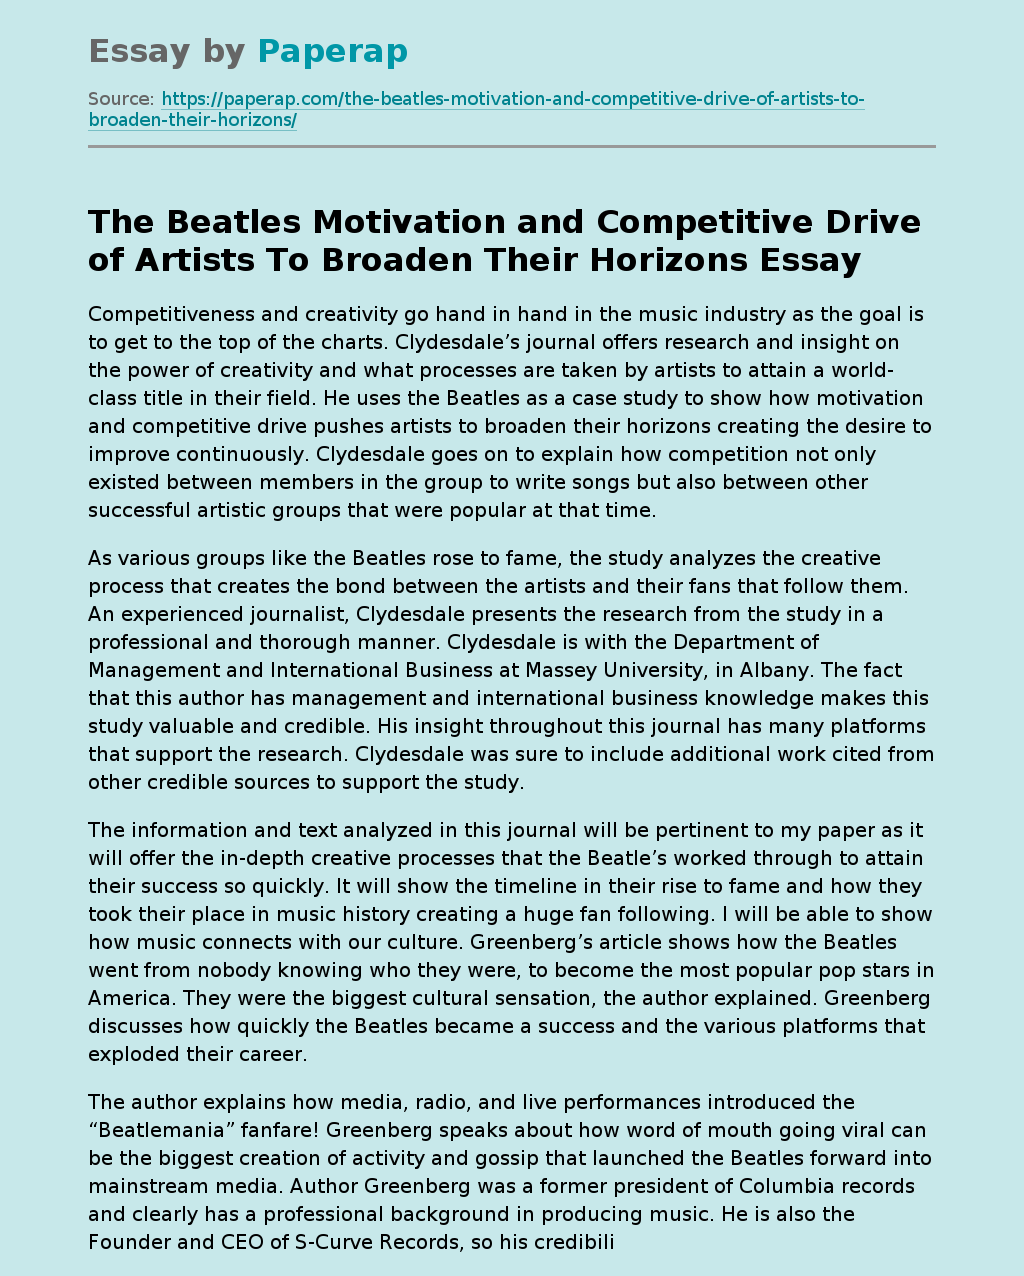 Beatles' Motivation for Artistic Growth